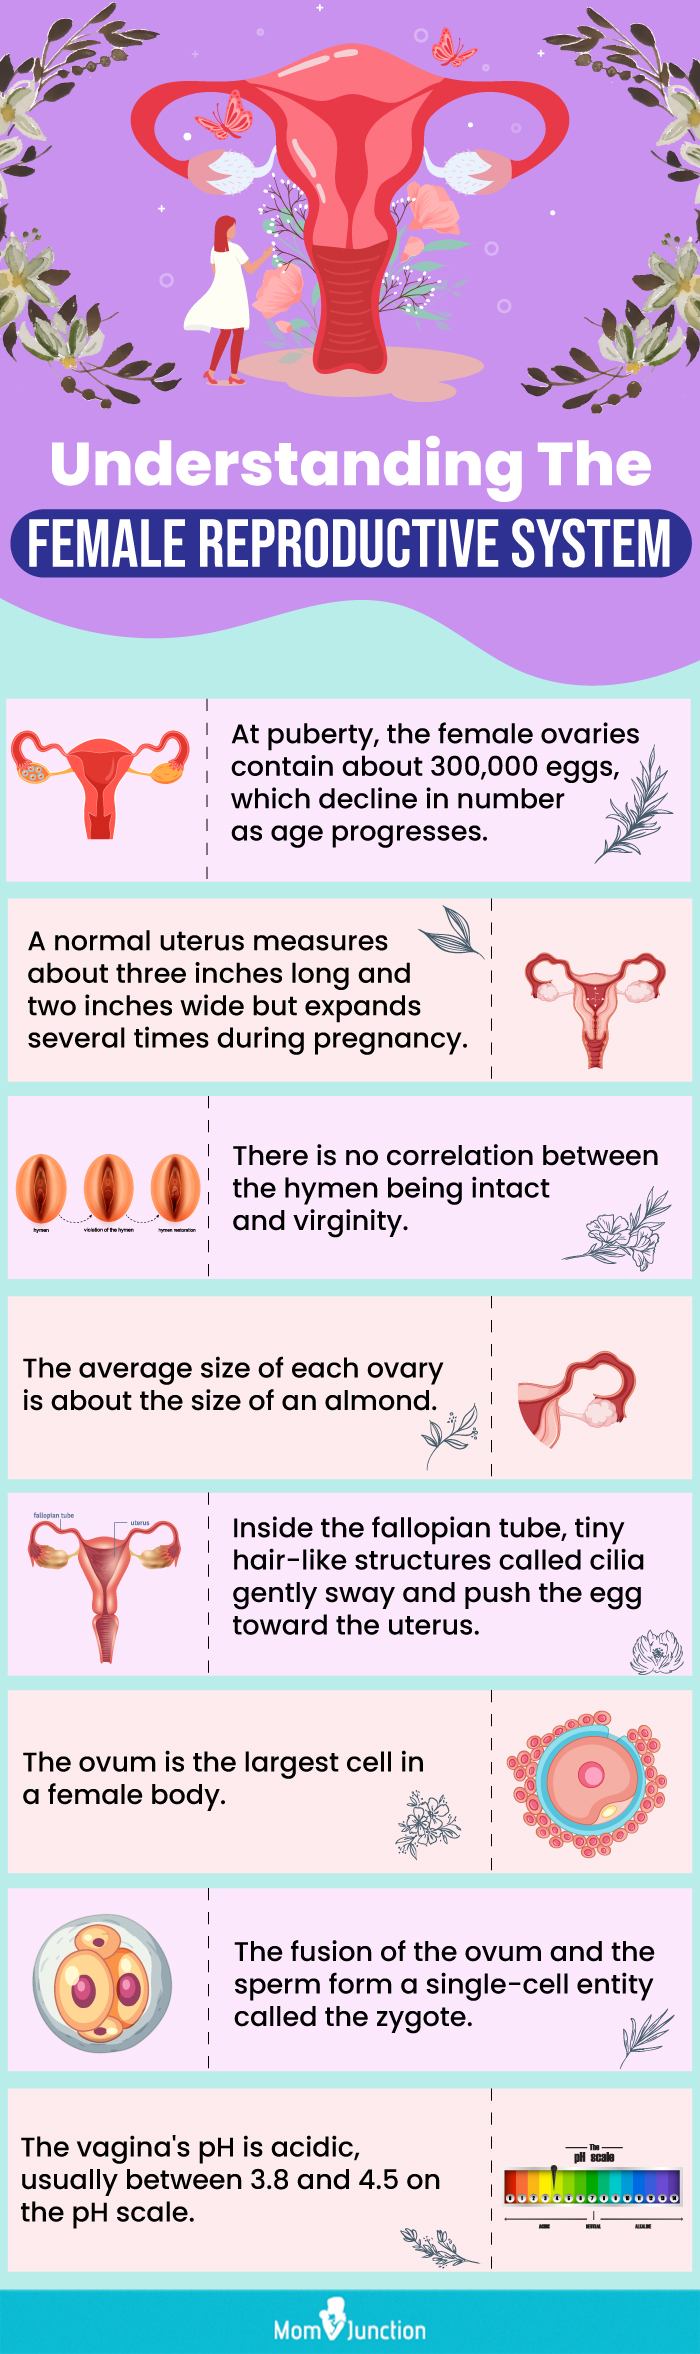 understanding the female reproductive system (infographic)